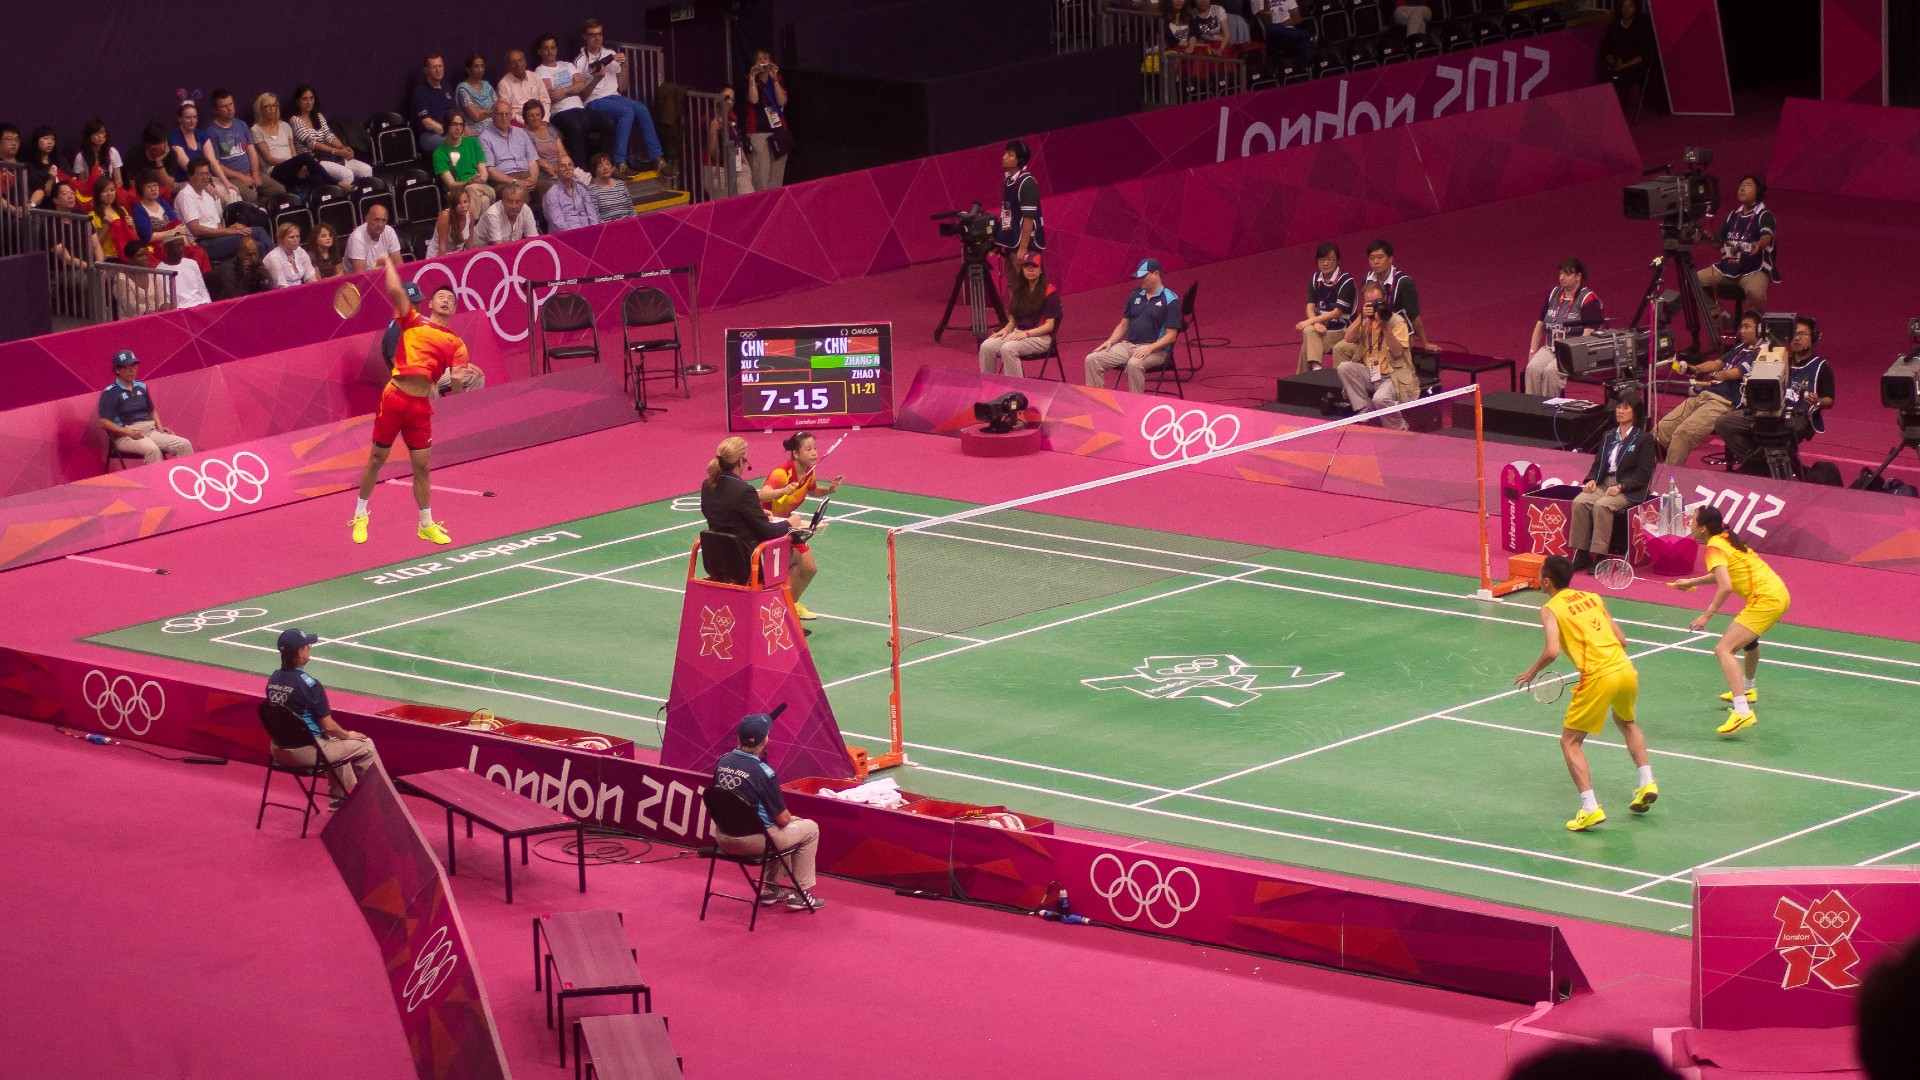 The BWF could introduce a new badminton scoring system. (Image: WIkipedia)